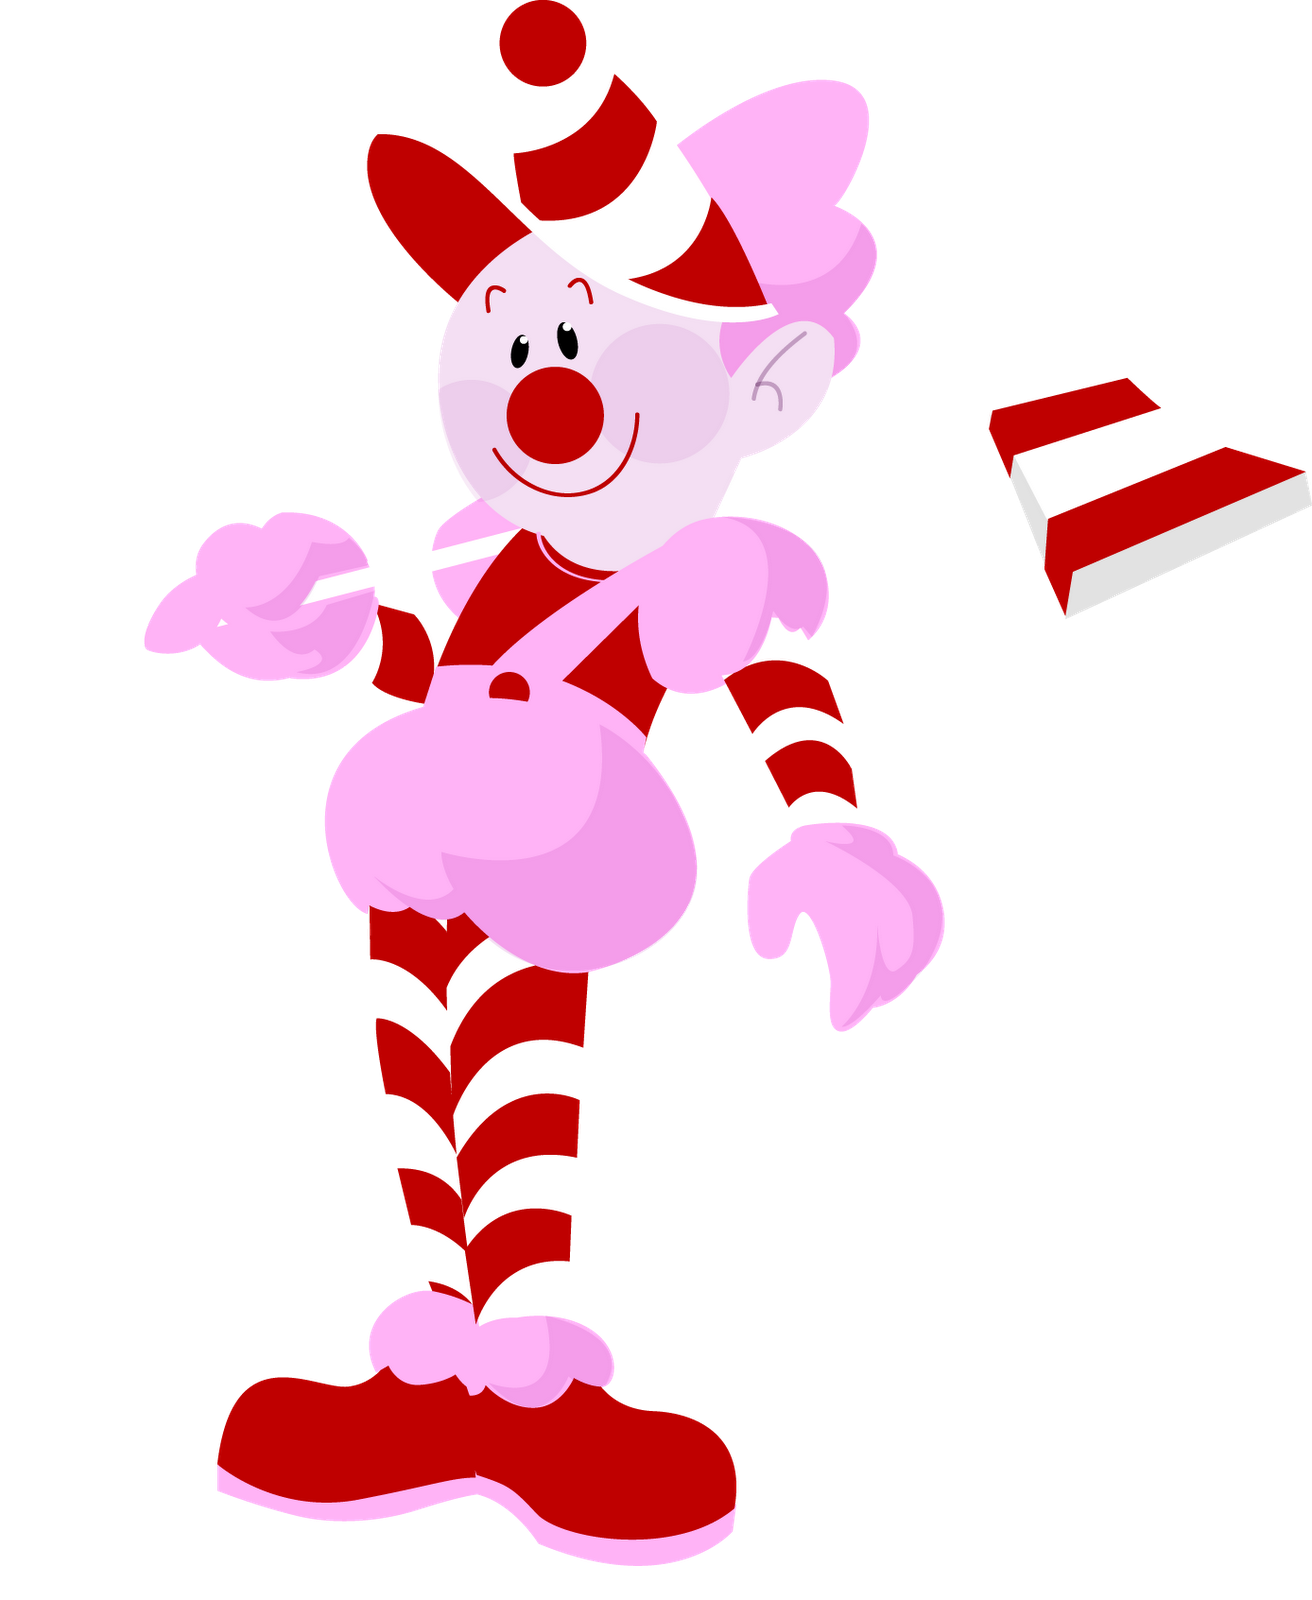 Candyland clipart queen frostine. I really like the